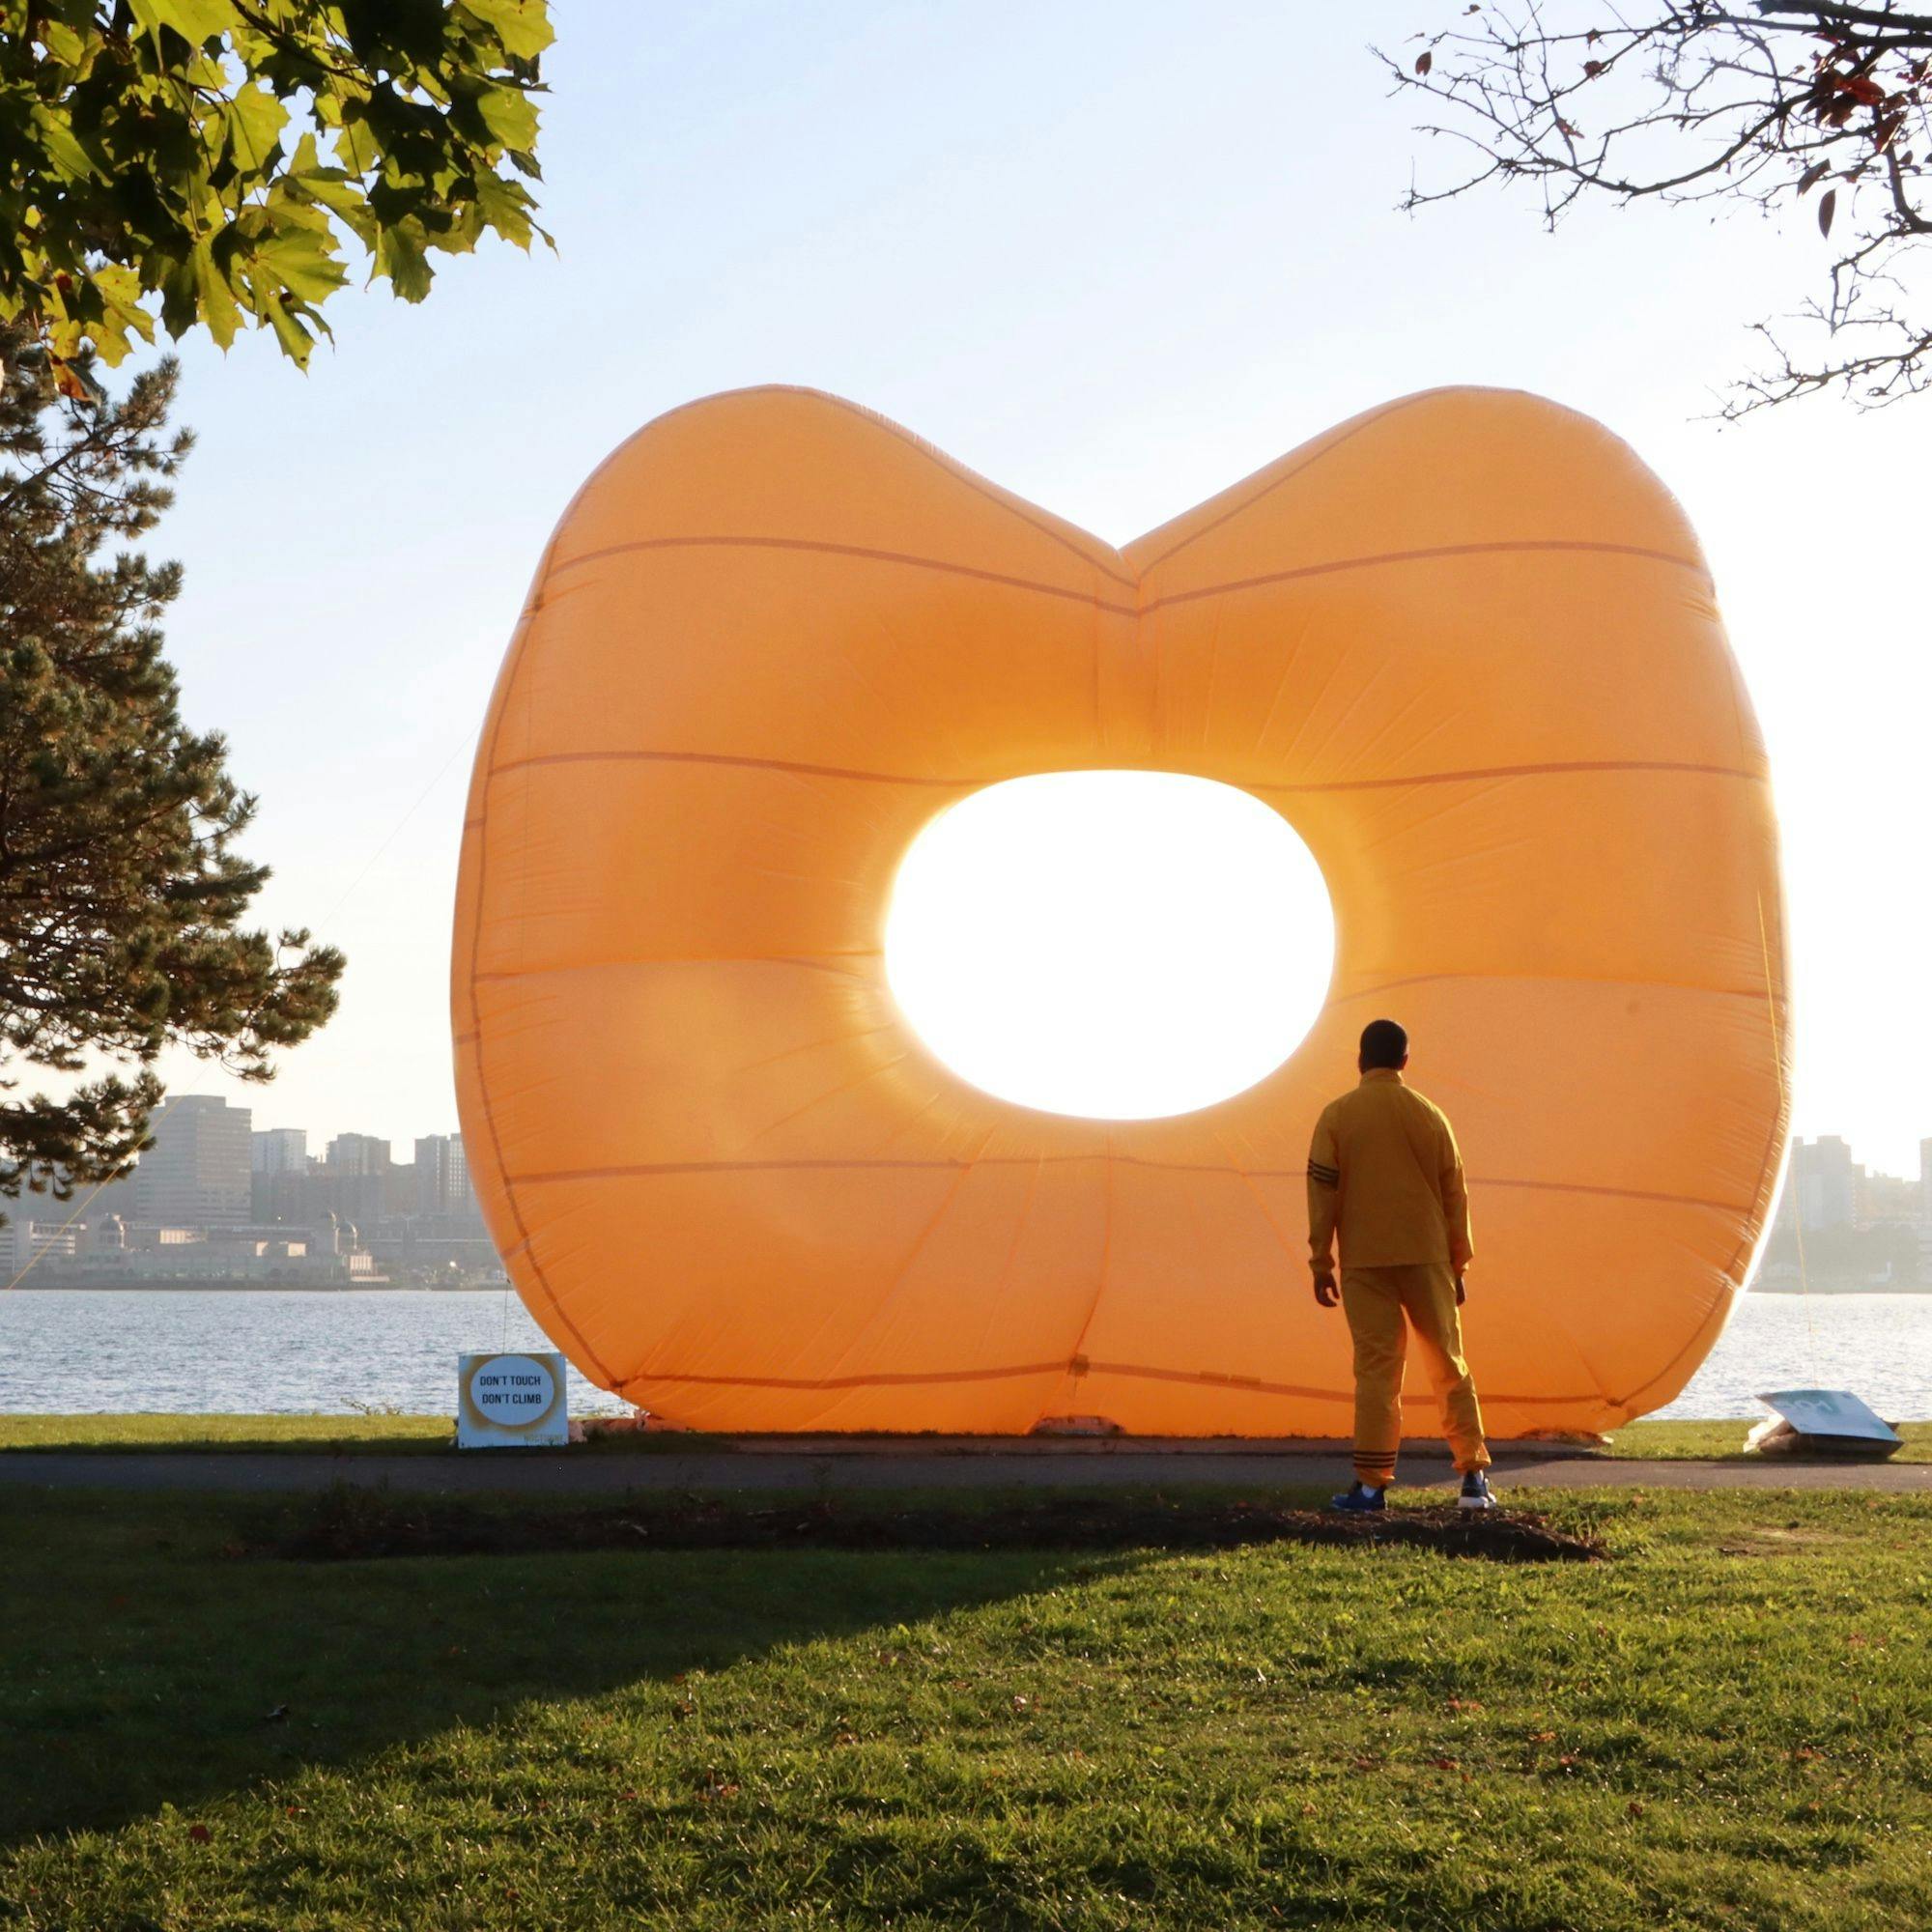 A man standing near a waterfront in front of a large orange balloon with a hole in the middle.